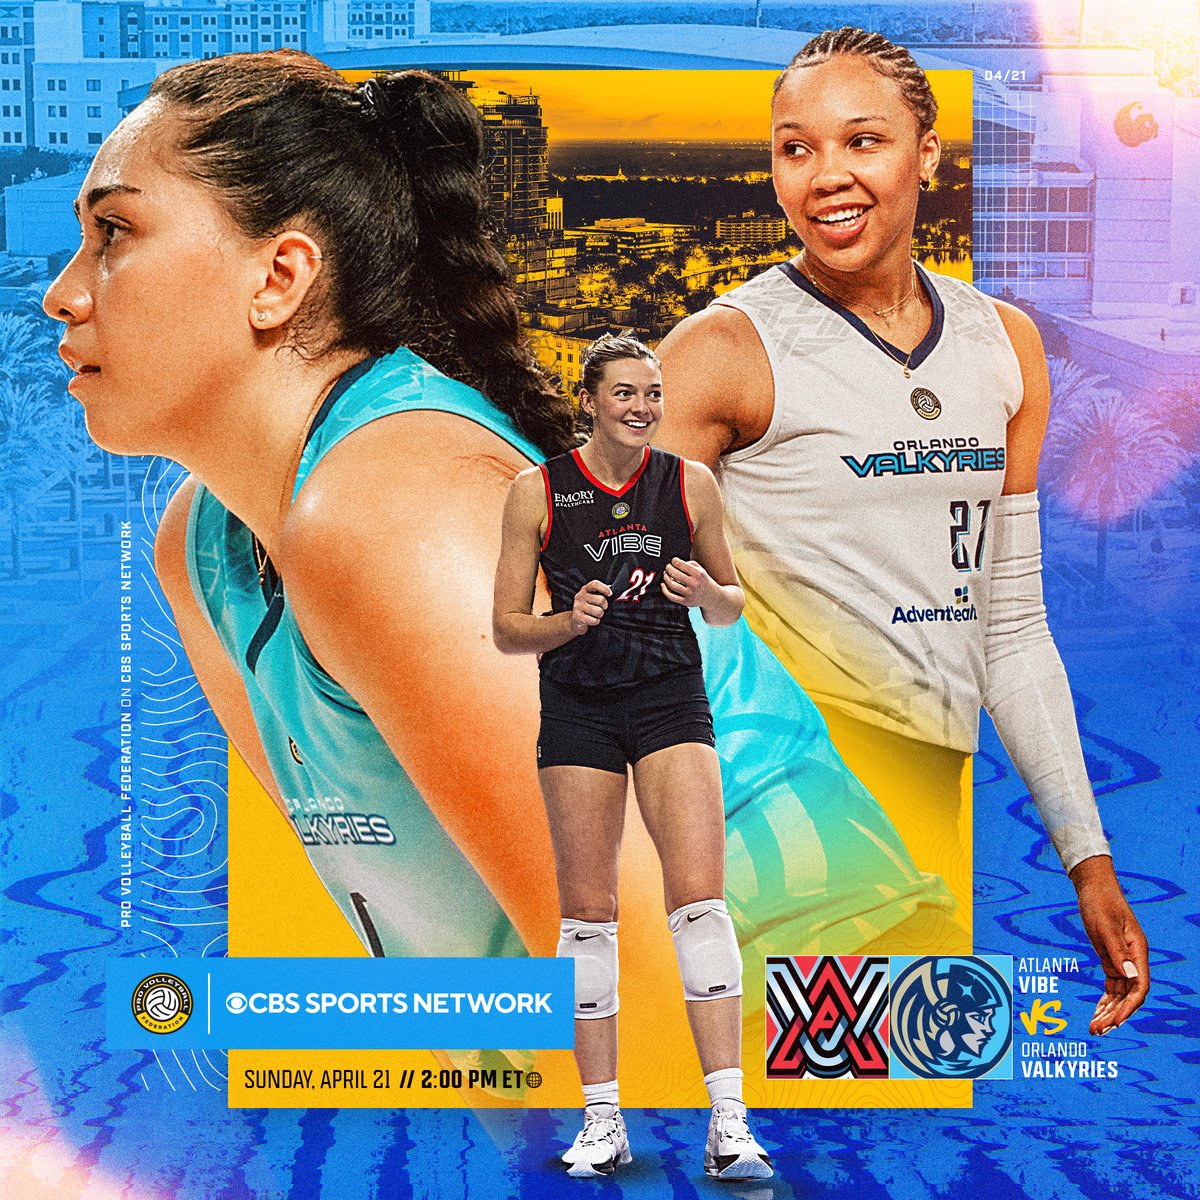 We're back on @CBSSportsNet this weekend with a 🔥 matchup! @AtlantaVibeVB visits the @orlvalkyries, this Sunday 2:00 p.m. ET. #RealProVolleyball #ProVolleyball